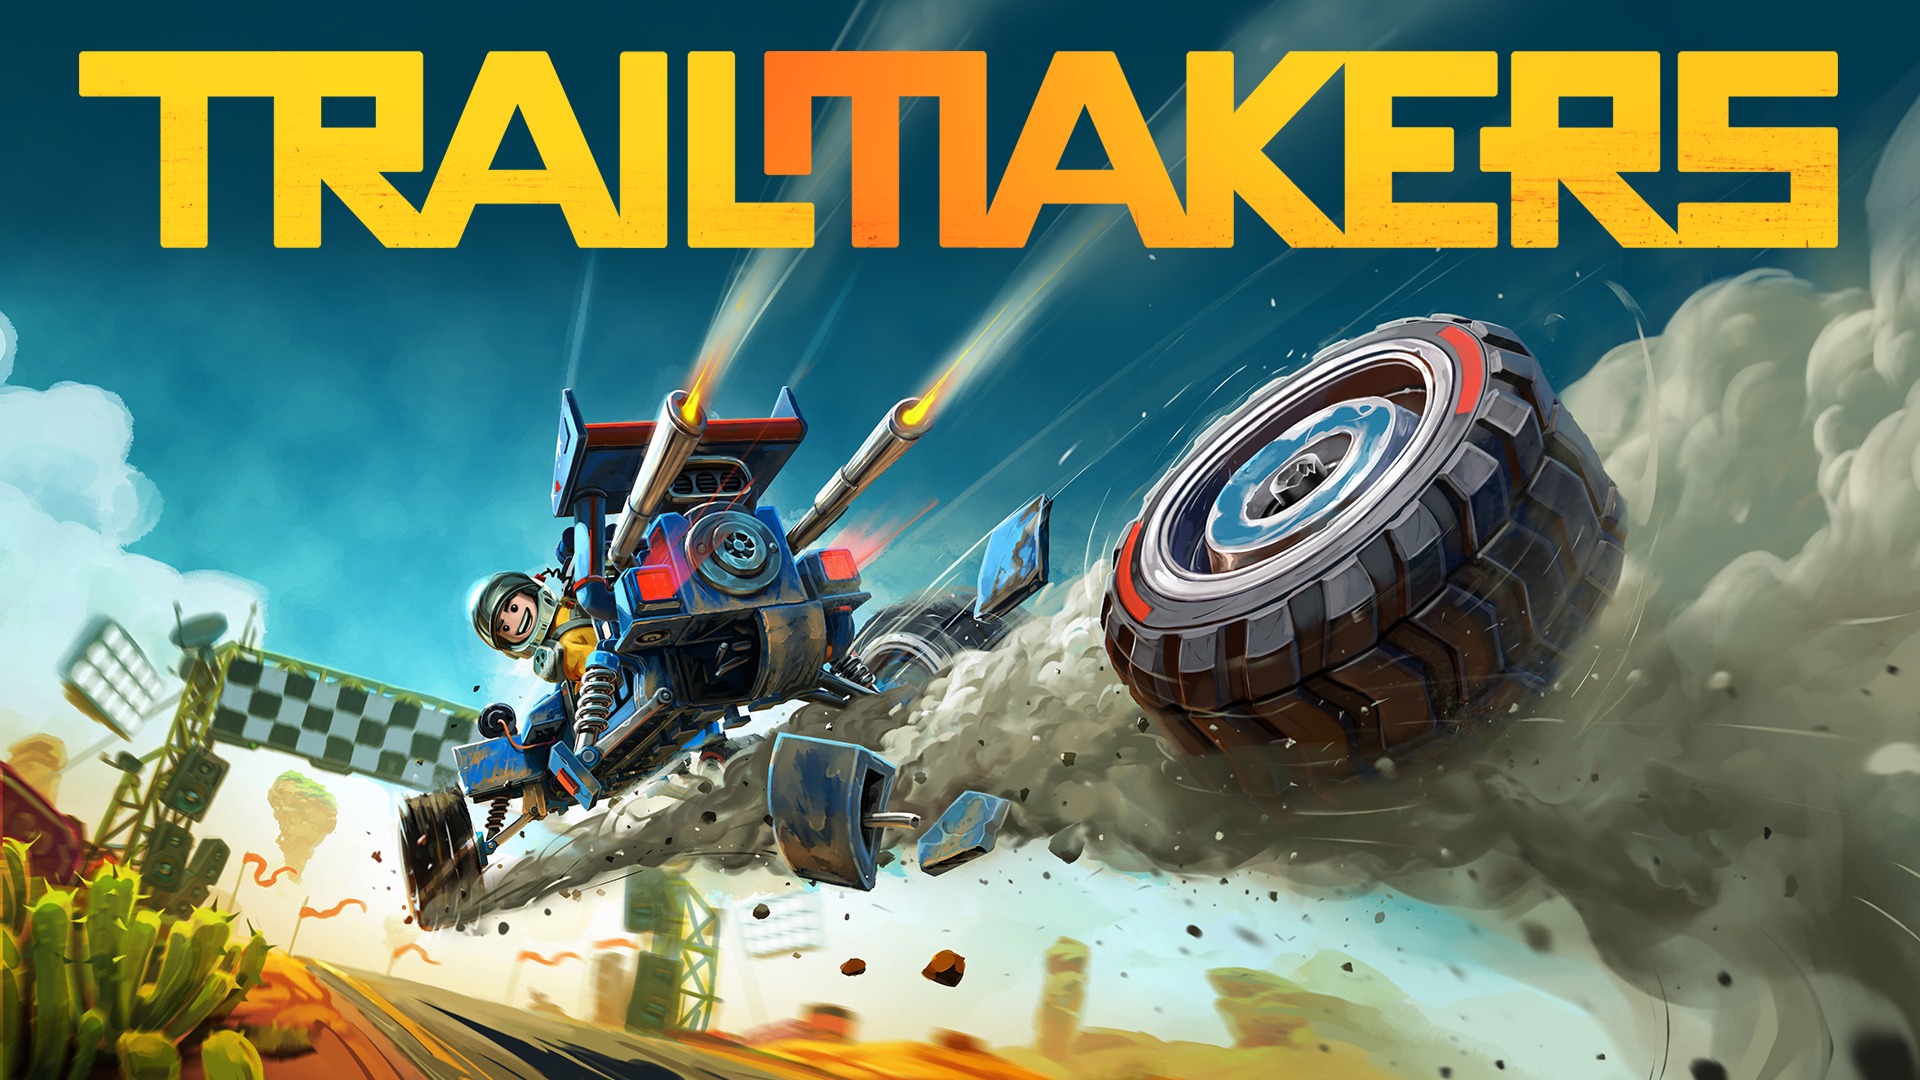 Sandbox Racer Trailmakers Is Now Available On Xbox One And PC, Build Your Own Vehicle And Race Against Countless Other Players